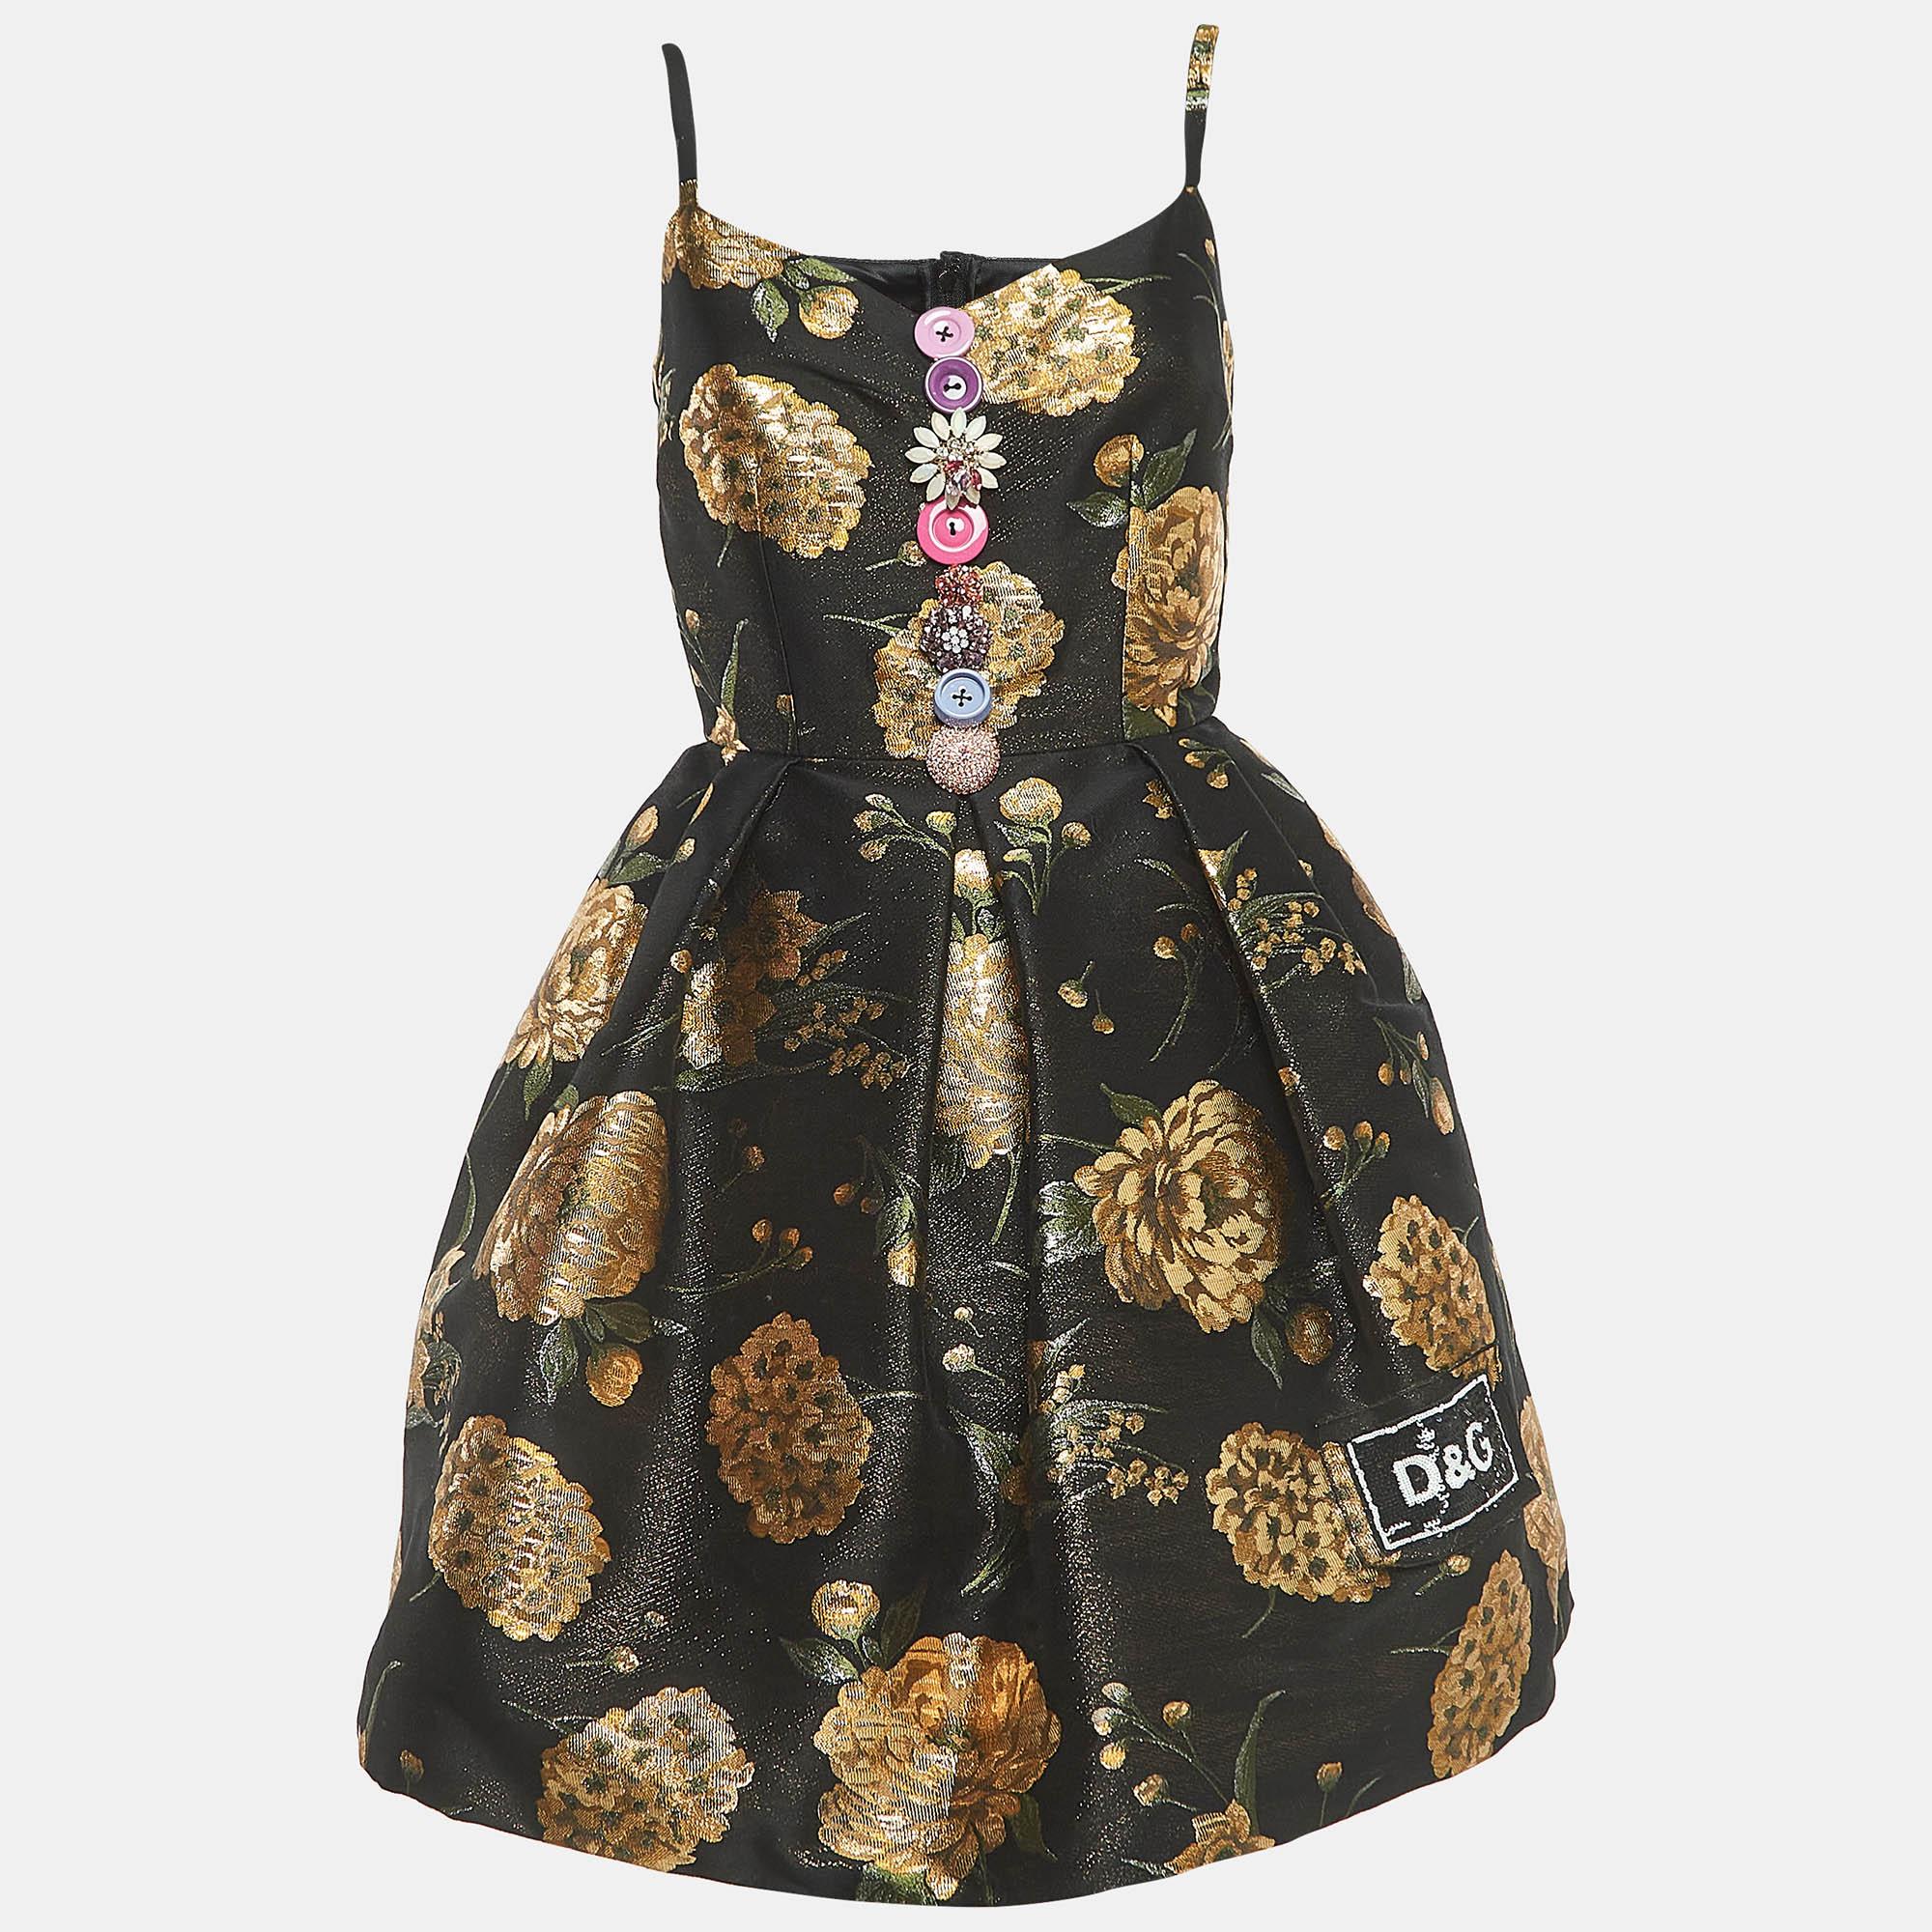 The fine artistry and the feminine silhouette of this Dolce & Gabbana dress exhibit the label's impeccable craftsmanship in tailoring. It is stitched using quality materials, has a good fit, and can be easily styled with chic accessories, open-toe